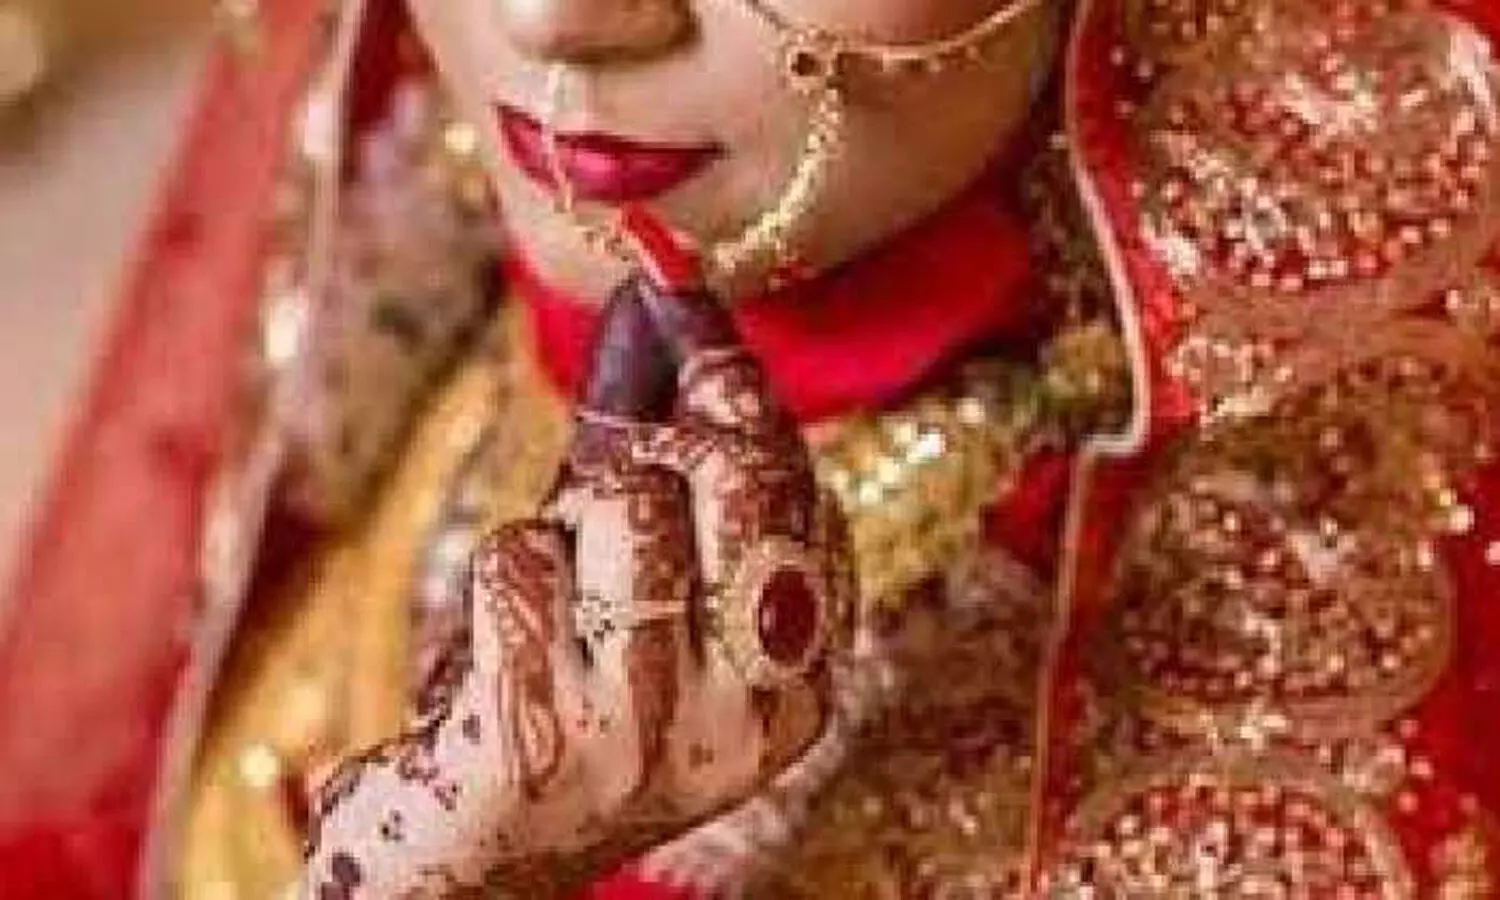 Gujarat Woman announces marriage with herself, to follow Hindu traditions; Claims first Sologamy In India